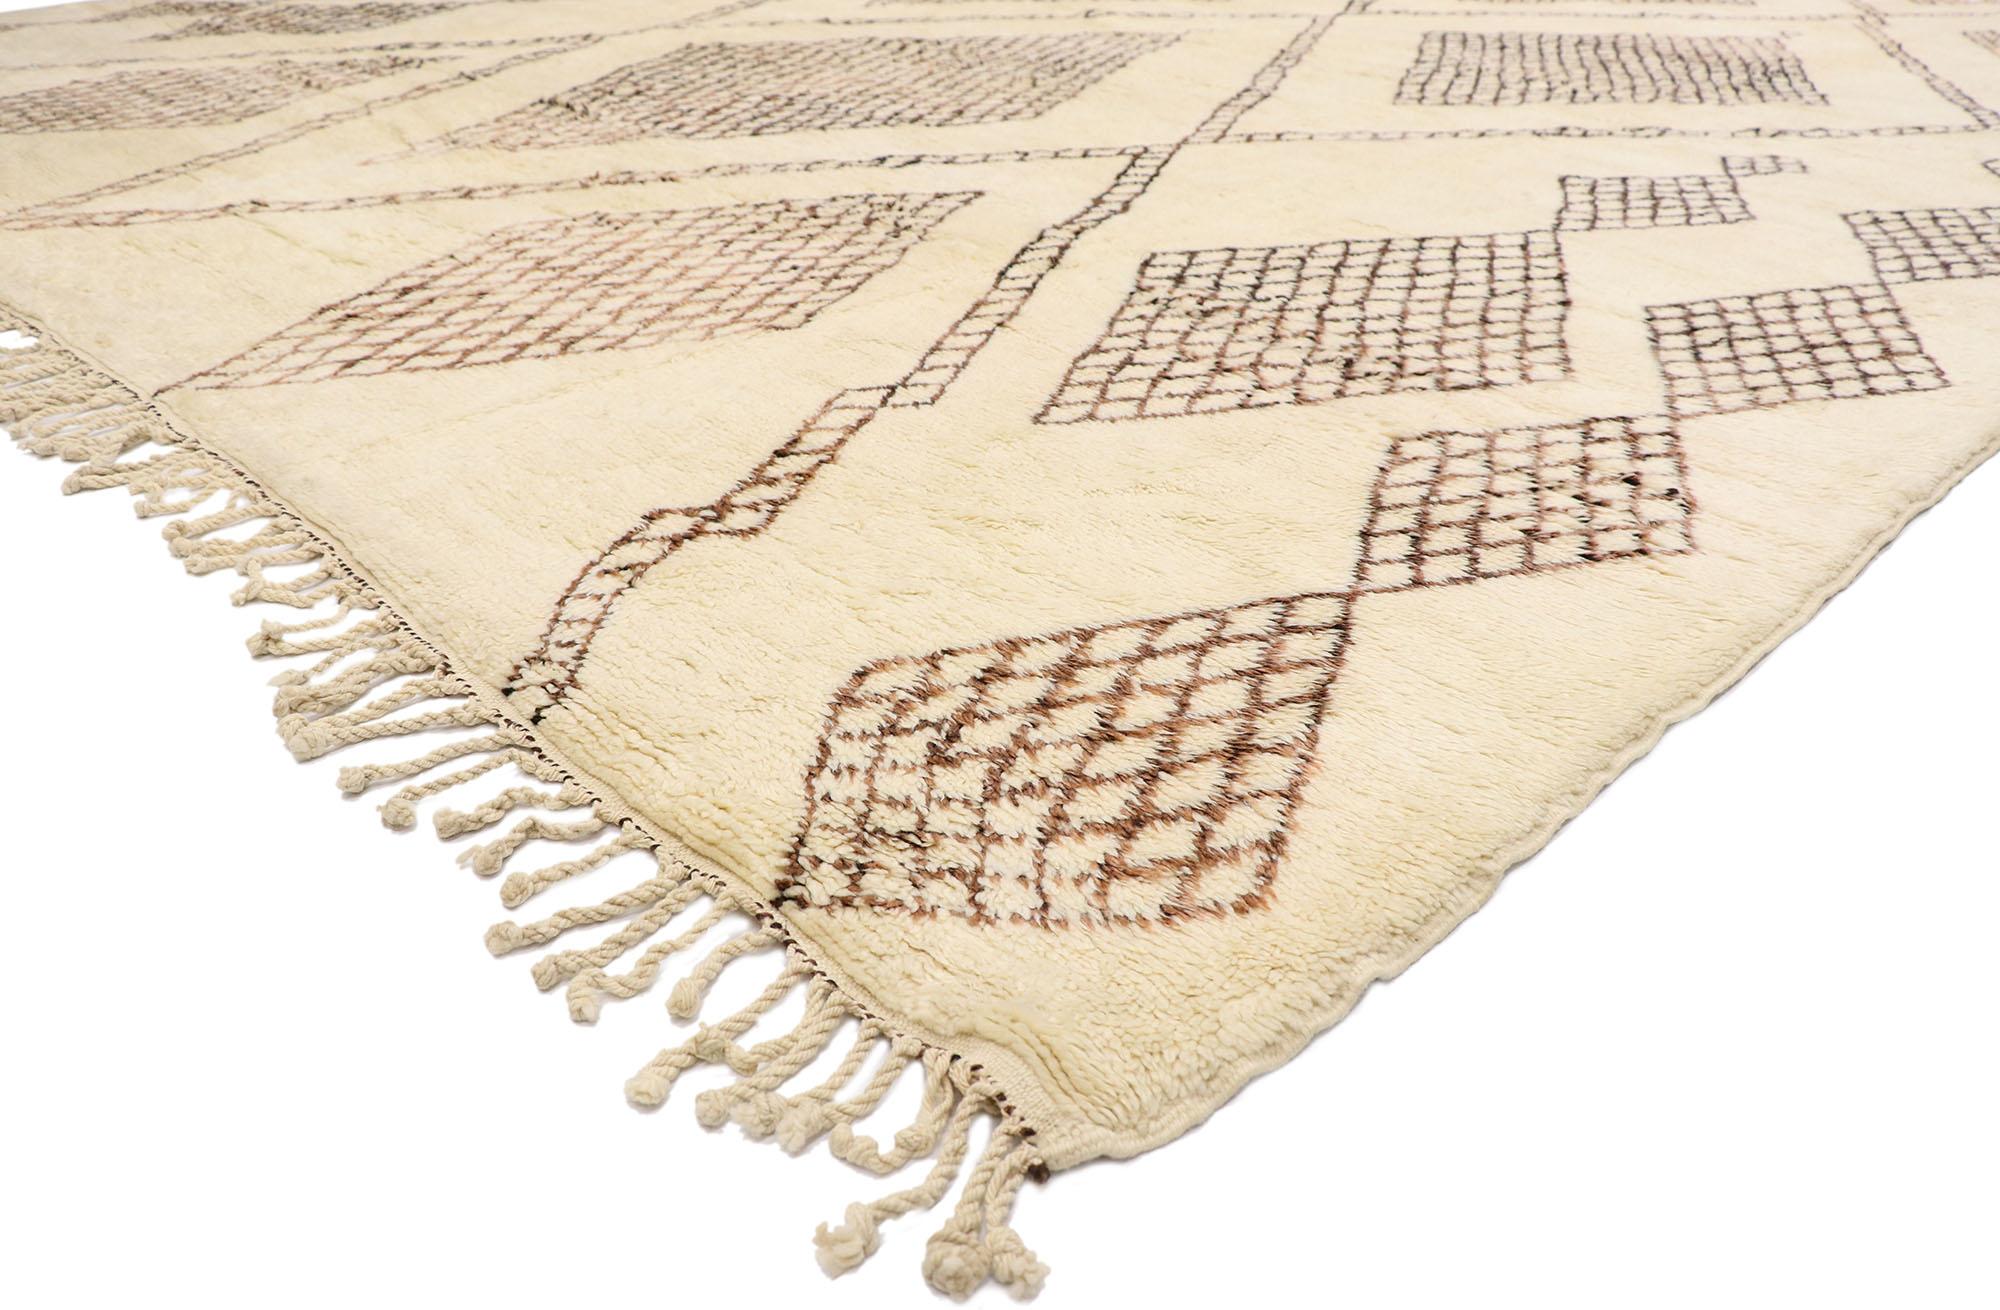 21144 Oversized Neutral Berber Moroccan Rug 13'09 x 18'02.
Nomadic charm meets the softer side of Shibui in this hand knotted wool Berber Moroccan rug. The intricate diamond silhouette and earthy neutral colors woven into this piece work together to